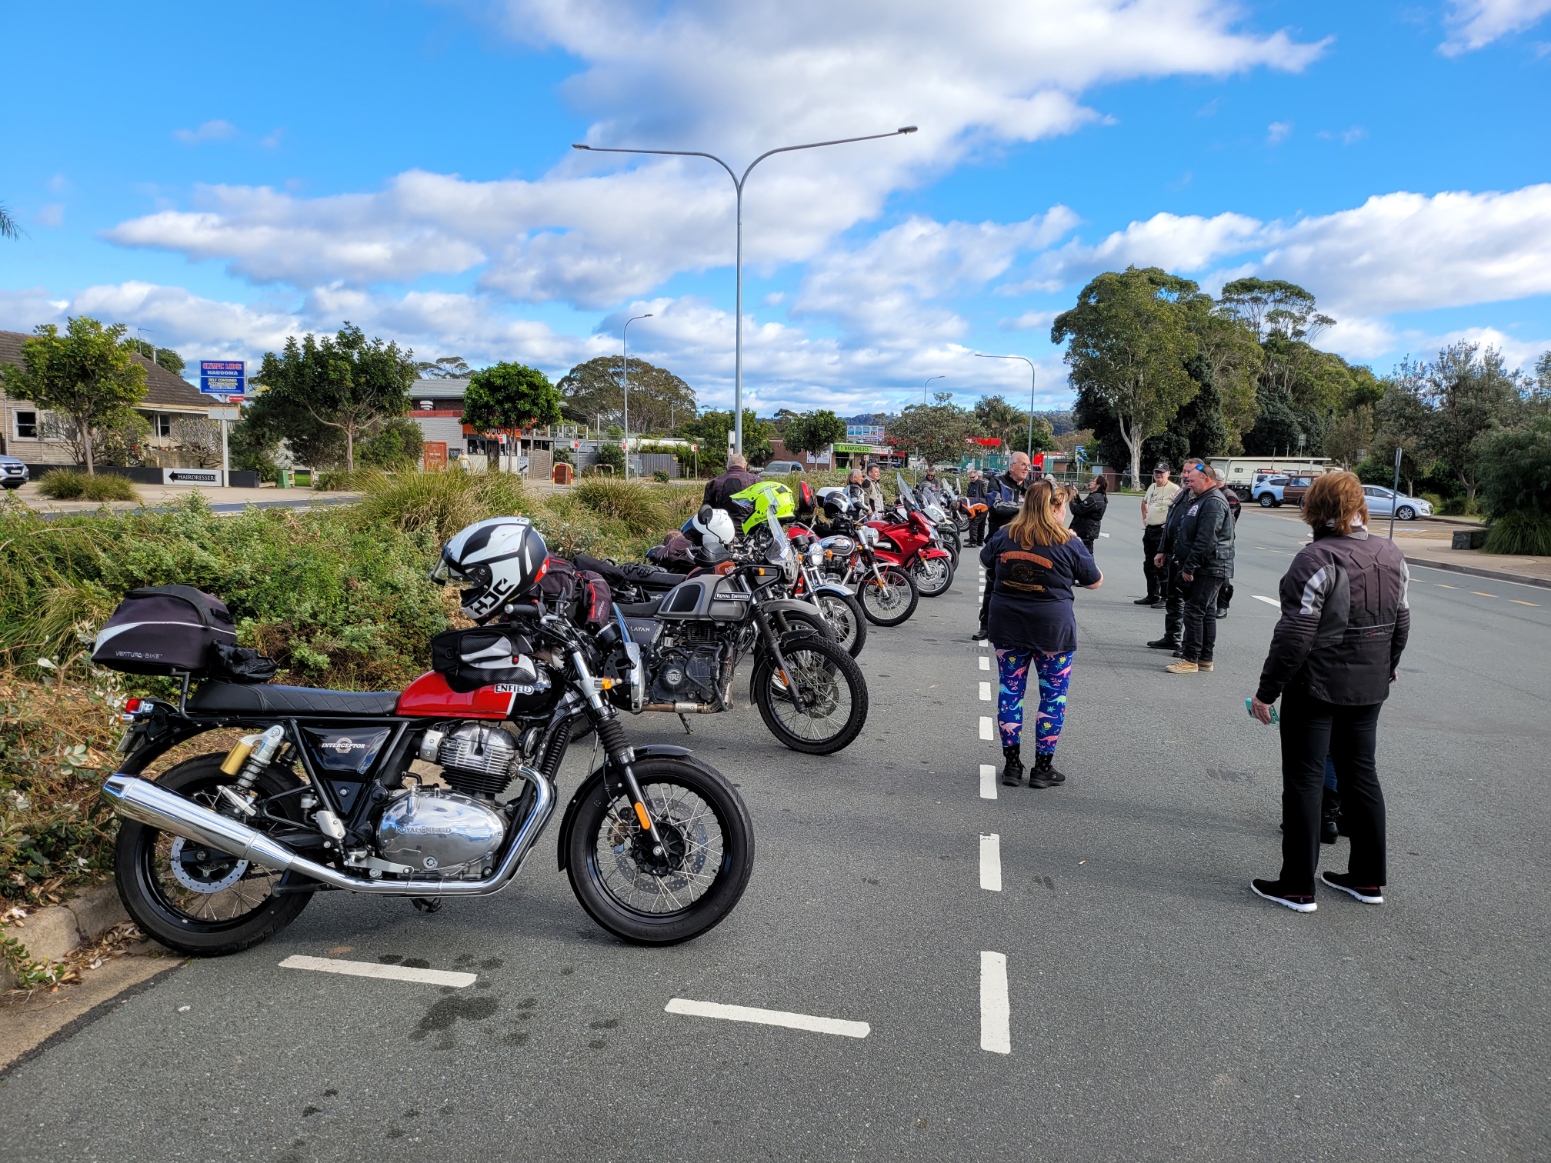 A group of motorcycles parked in a parking lot Description automatically generated with medium confidence